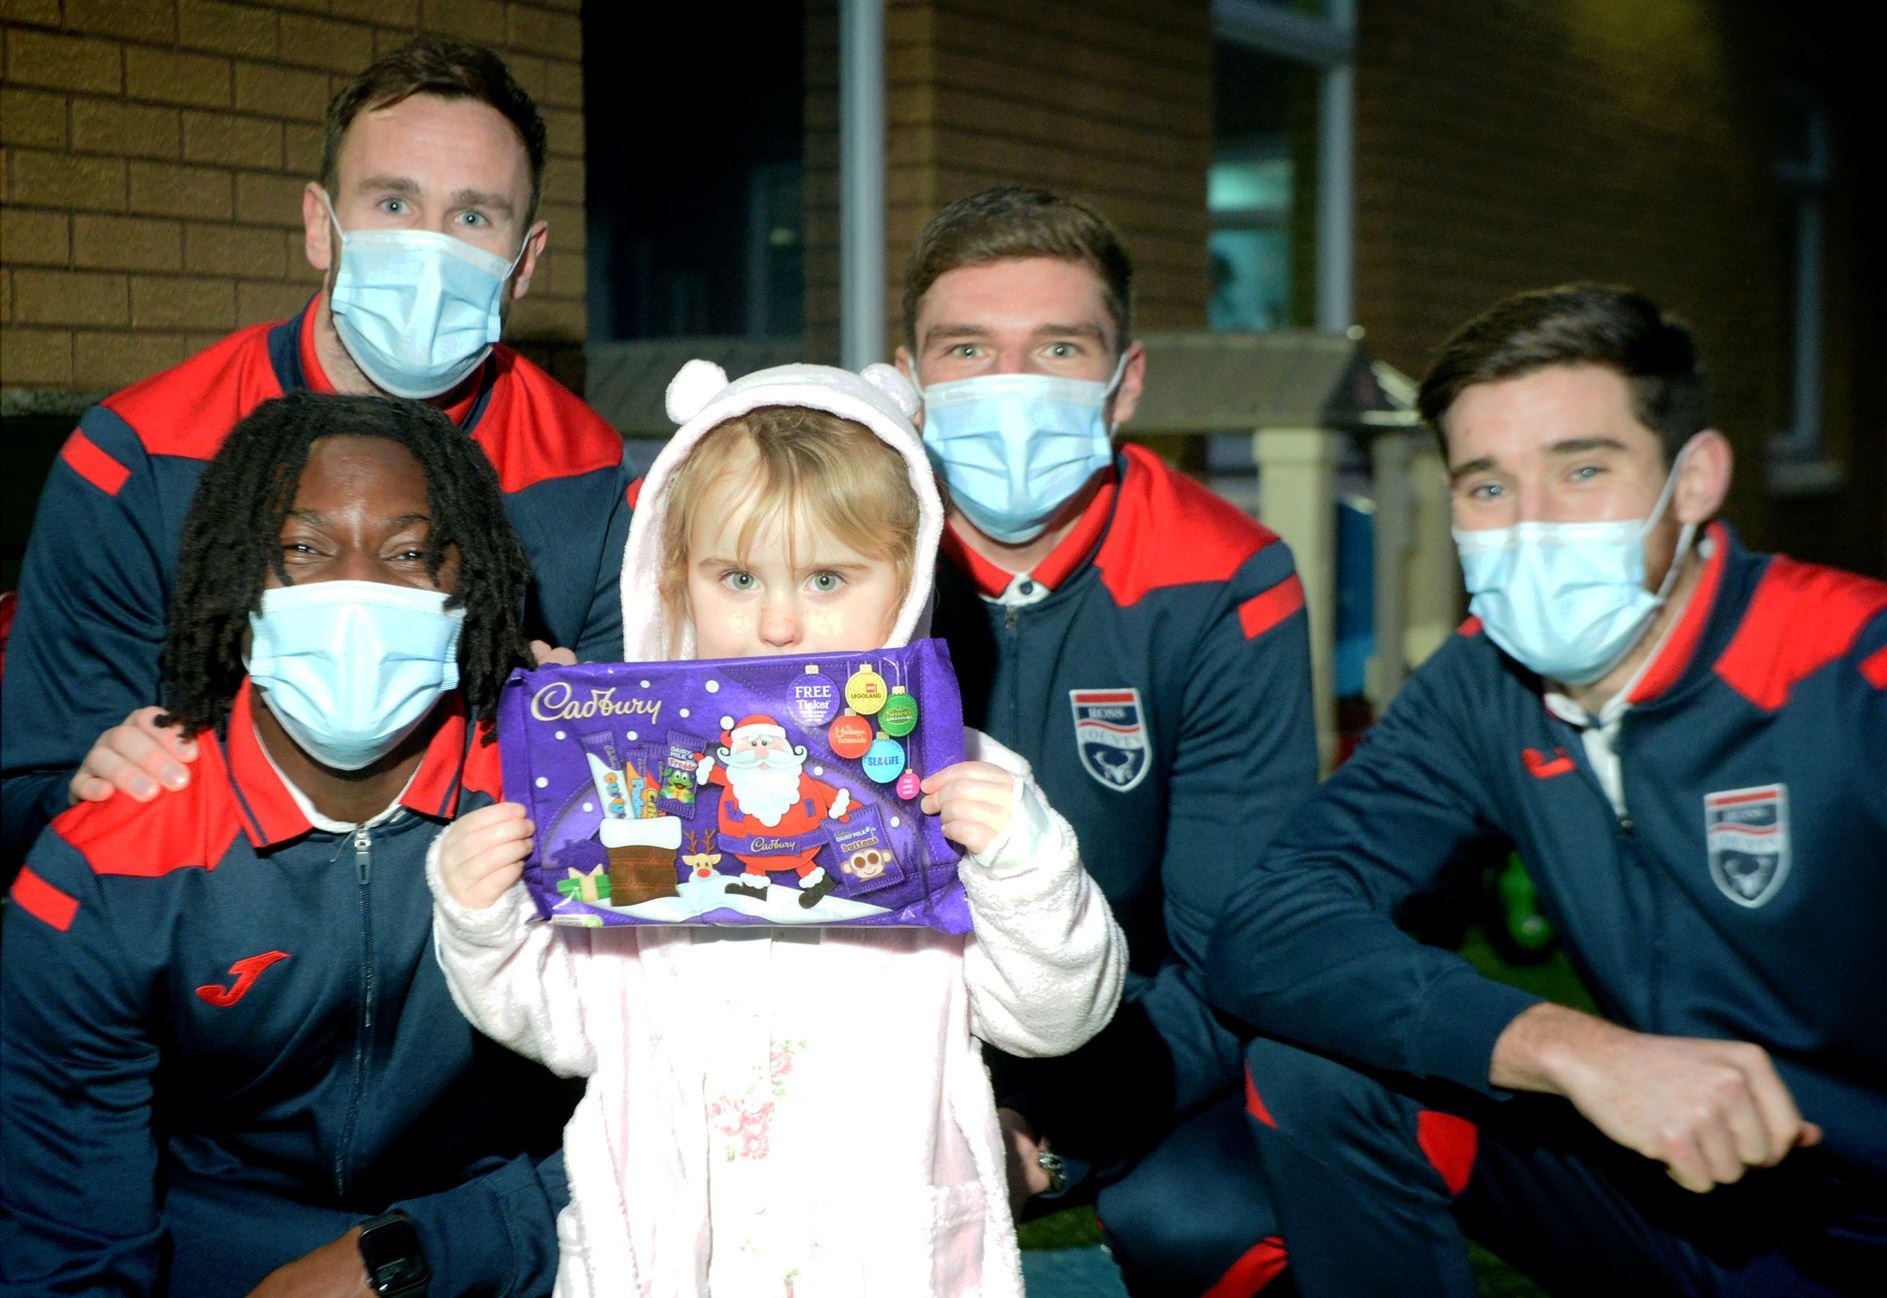 Ross County football players visit the The Highland Children's Unit at Raigmore Hospital: Ali gets a photo with Keith Watson, Joseph Hungbo, Ross Callachan and Jack Baldwin from Ross County FC.. Picture: James Mackenzie.